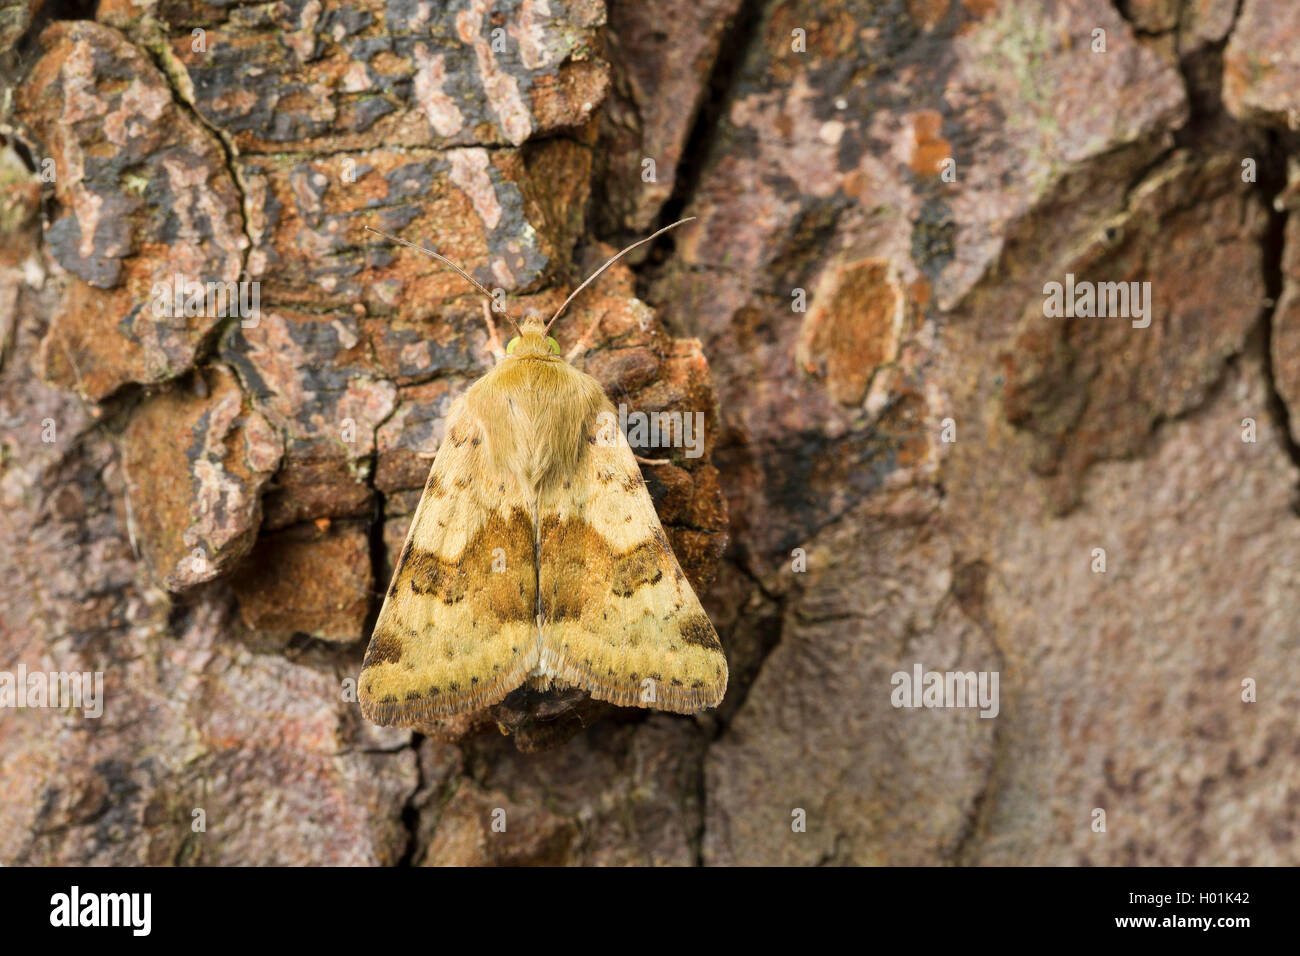 Marbled clover (Heliothis viriplaca, Heliothis dipsacea), sits on bark, Germany Stock Photo